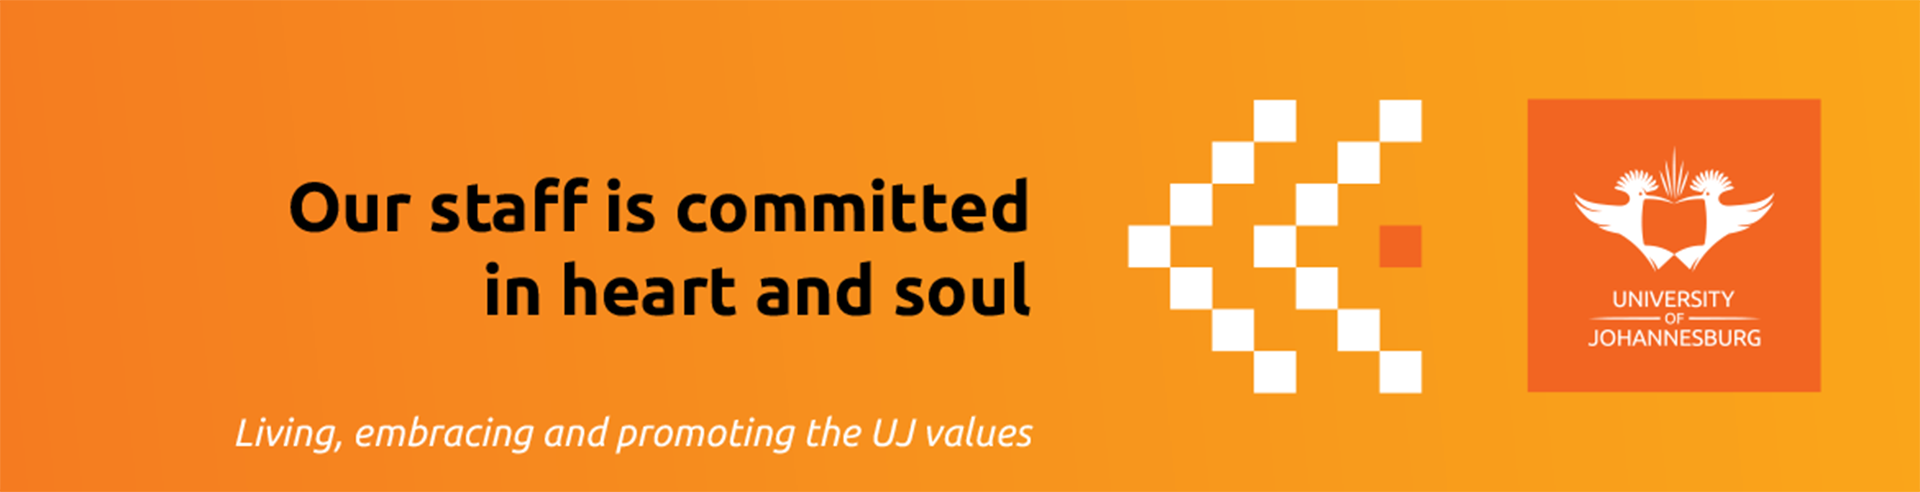 Uj Values Expressions Posters 2020 Ulink 1170x300mm 26